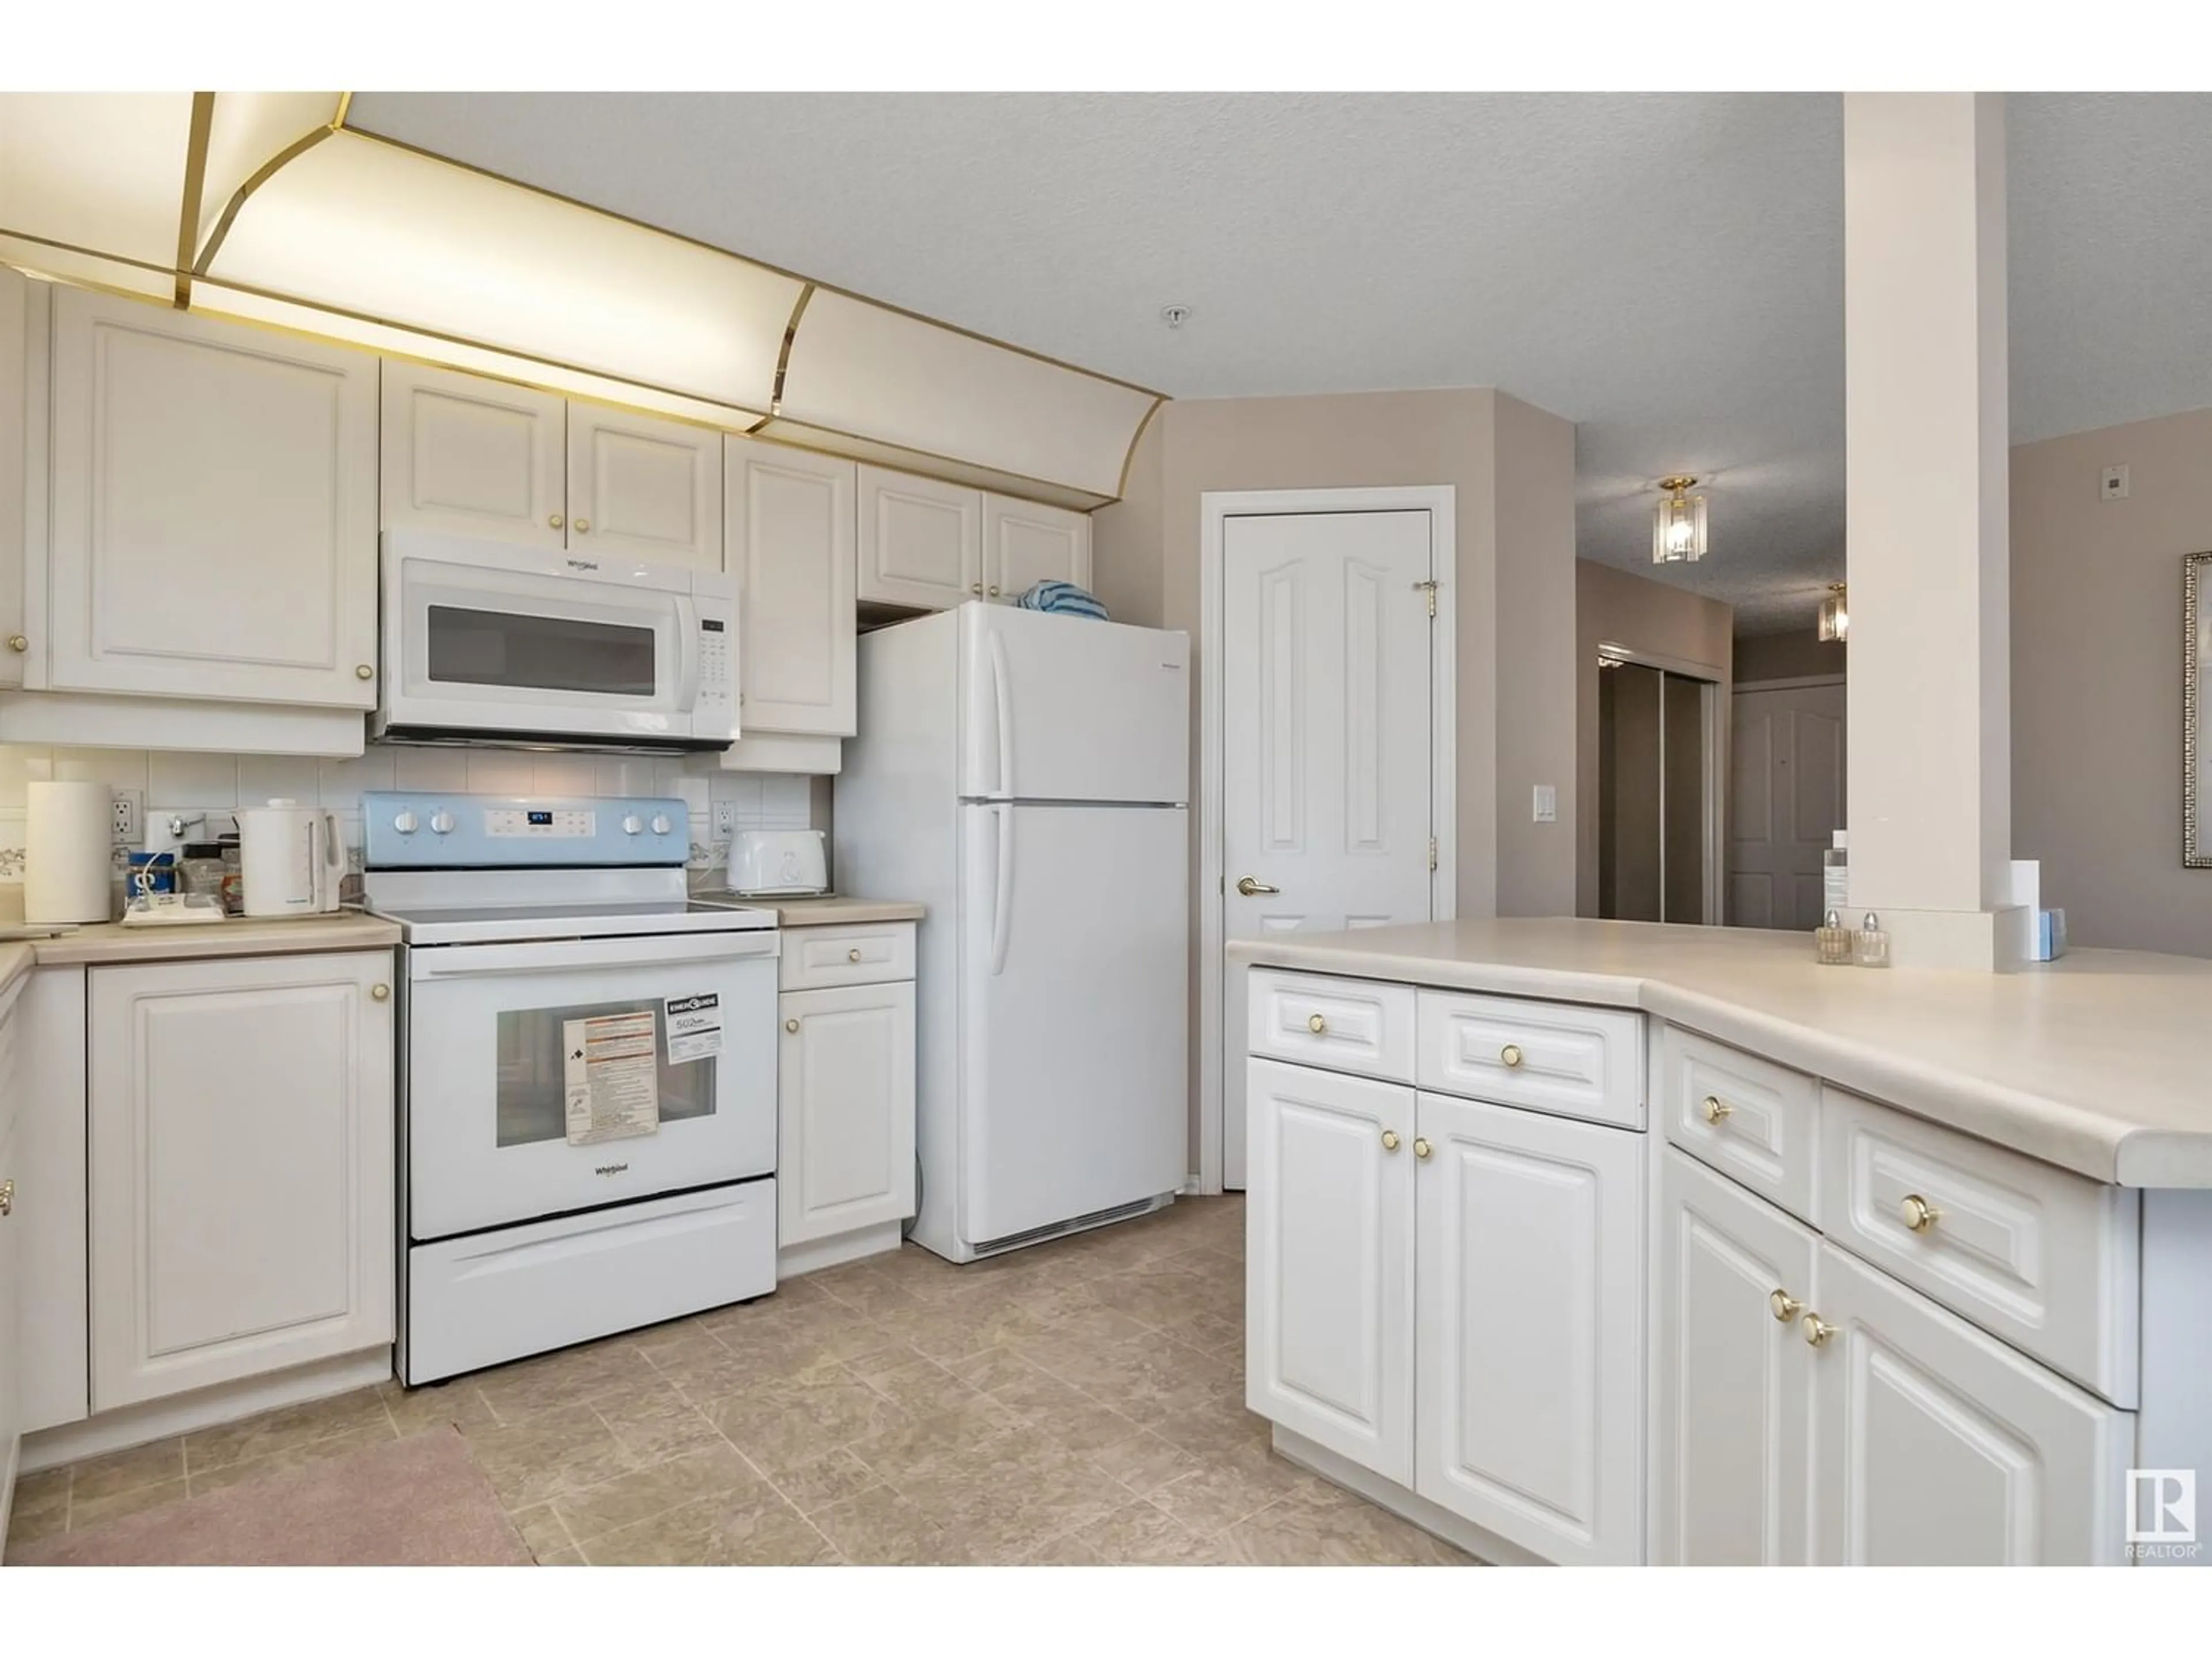 Standard kitchen for #301 6703 172 ST NW NW, Edmonton Alberta T5T6H9